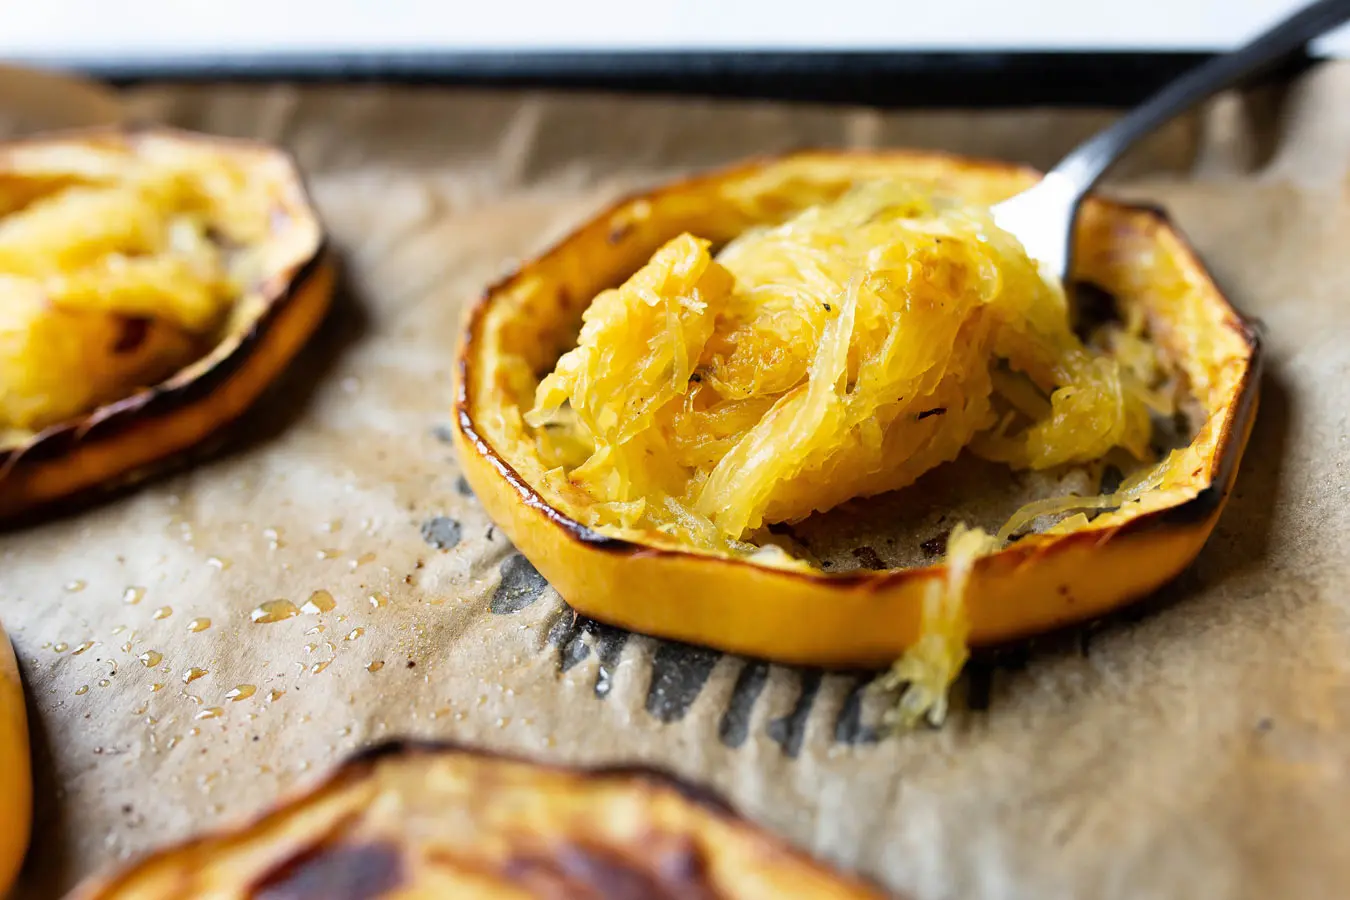 Roasted Spaghetti Squash rings on a lined baking tray. A fork has been used to gather all the spaghetti strands from the inside of the ring, leaving the skin intact.